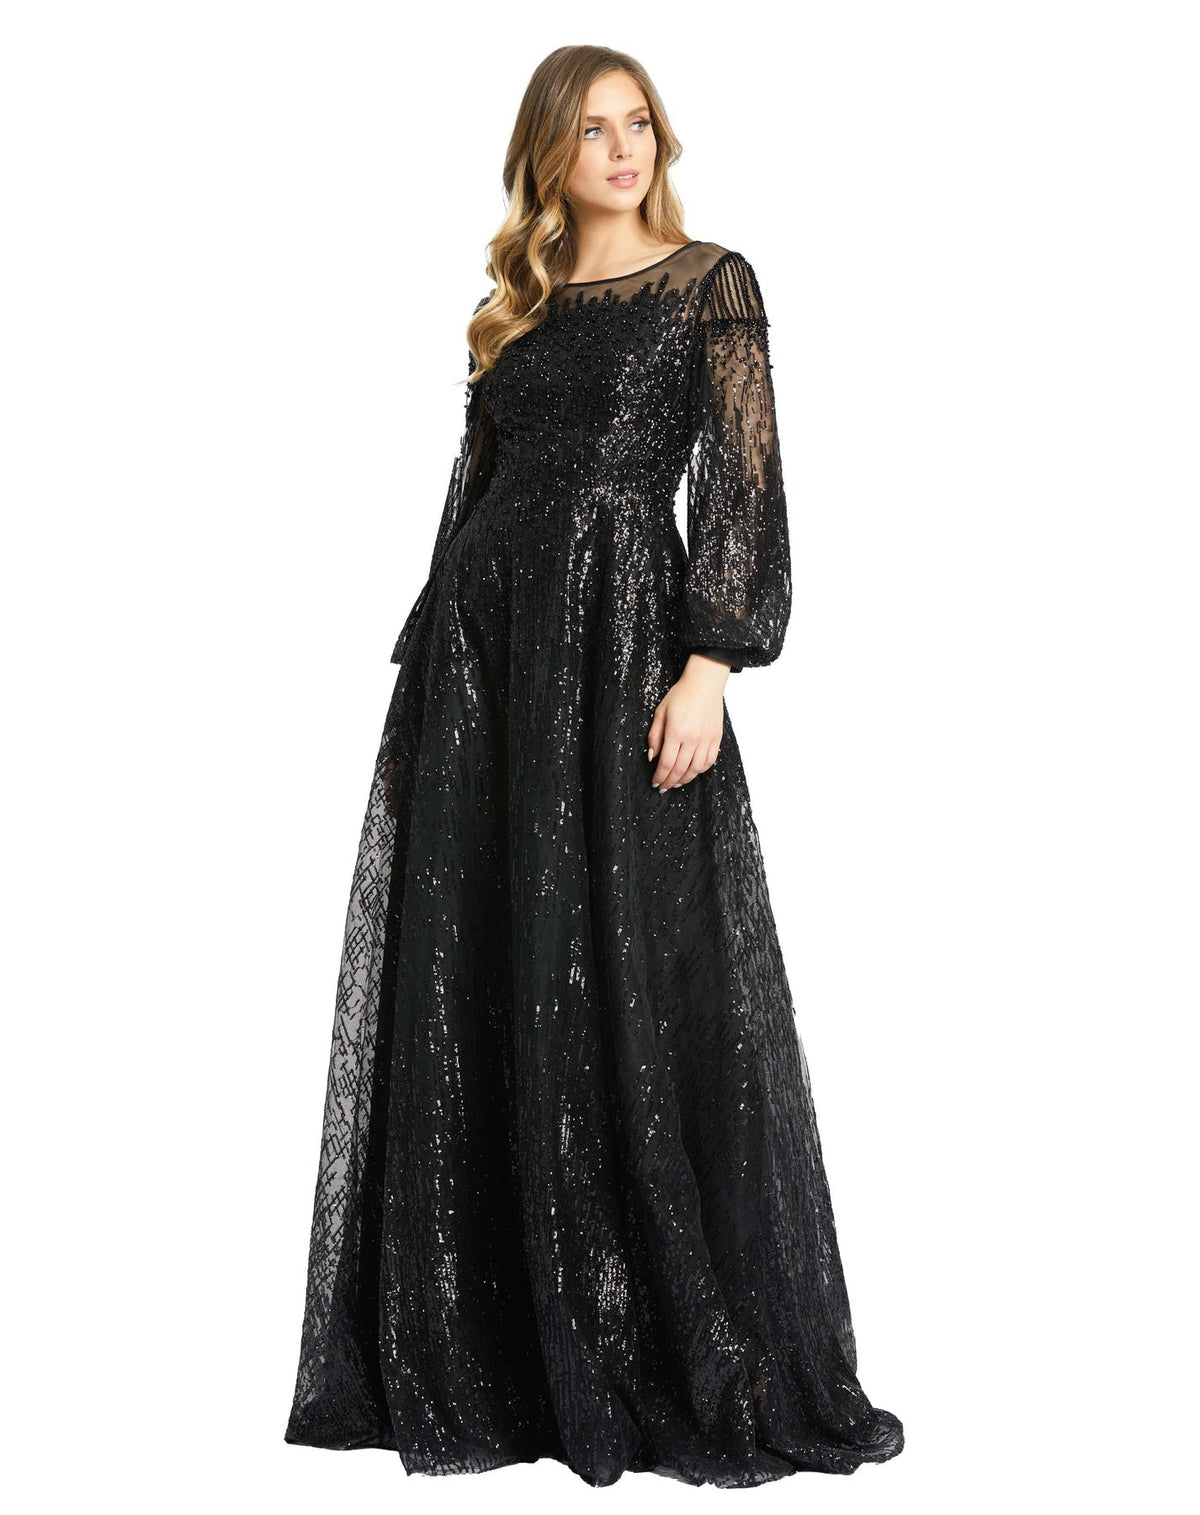 Jewel encrusted long sleeve A line modest gown - black